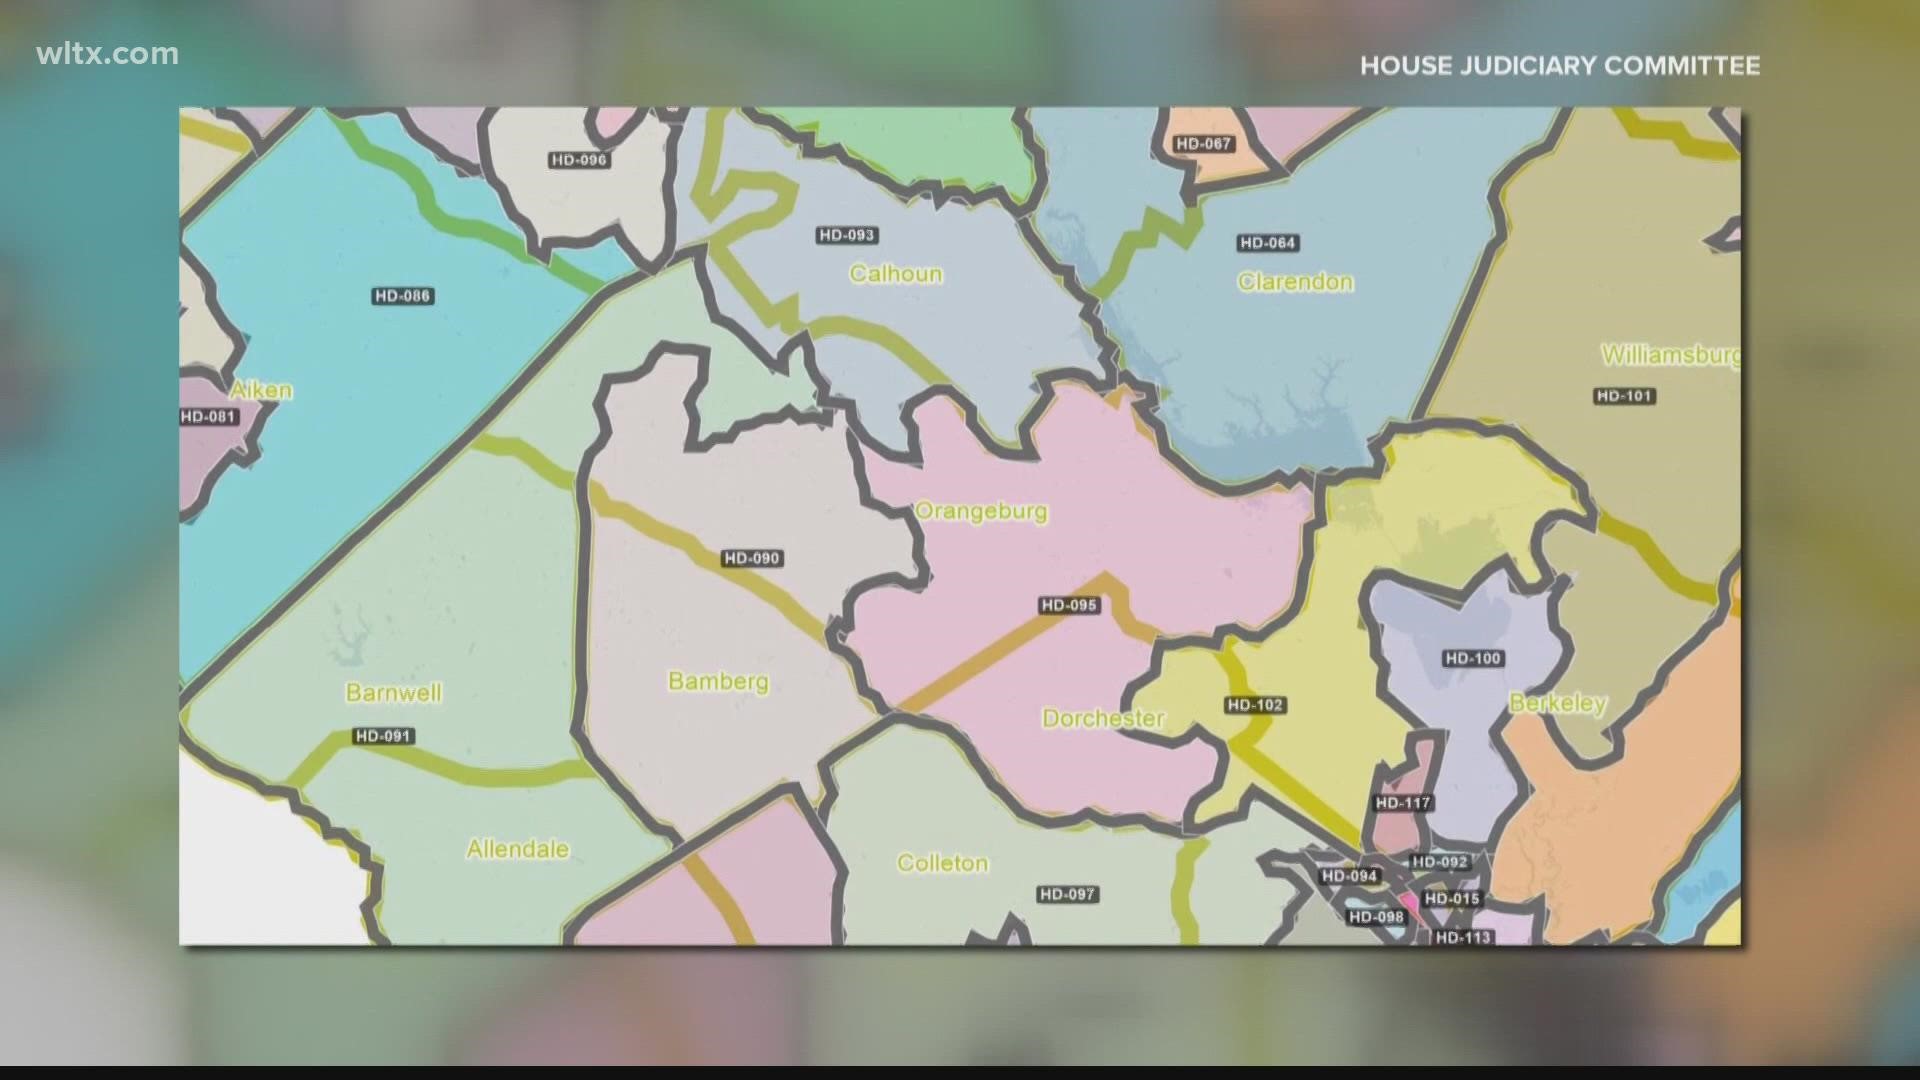 The lawsuit, filed by the American Civil Liberties Union, claims the new South Carolina House map is unconstitutional and discriminates against Black voters.